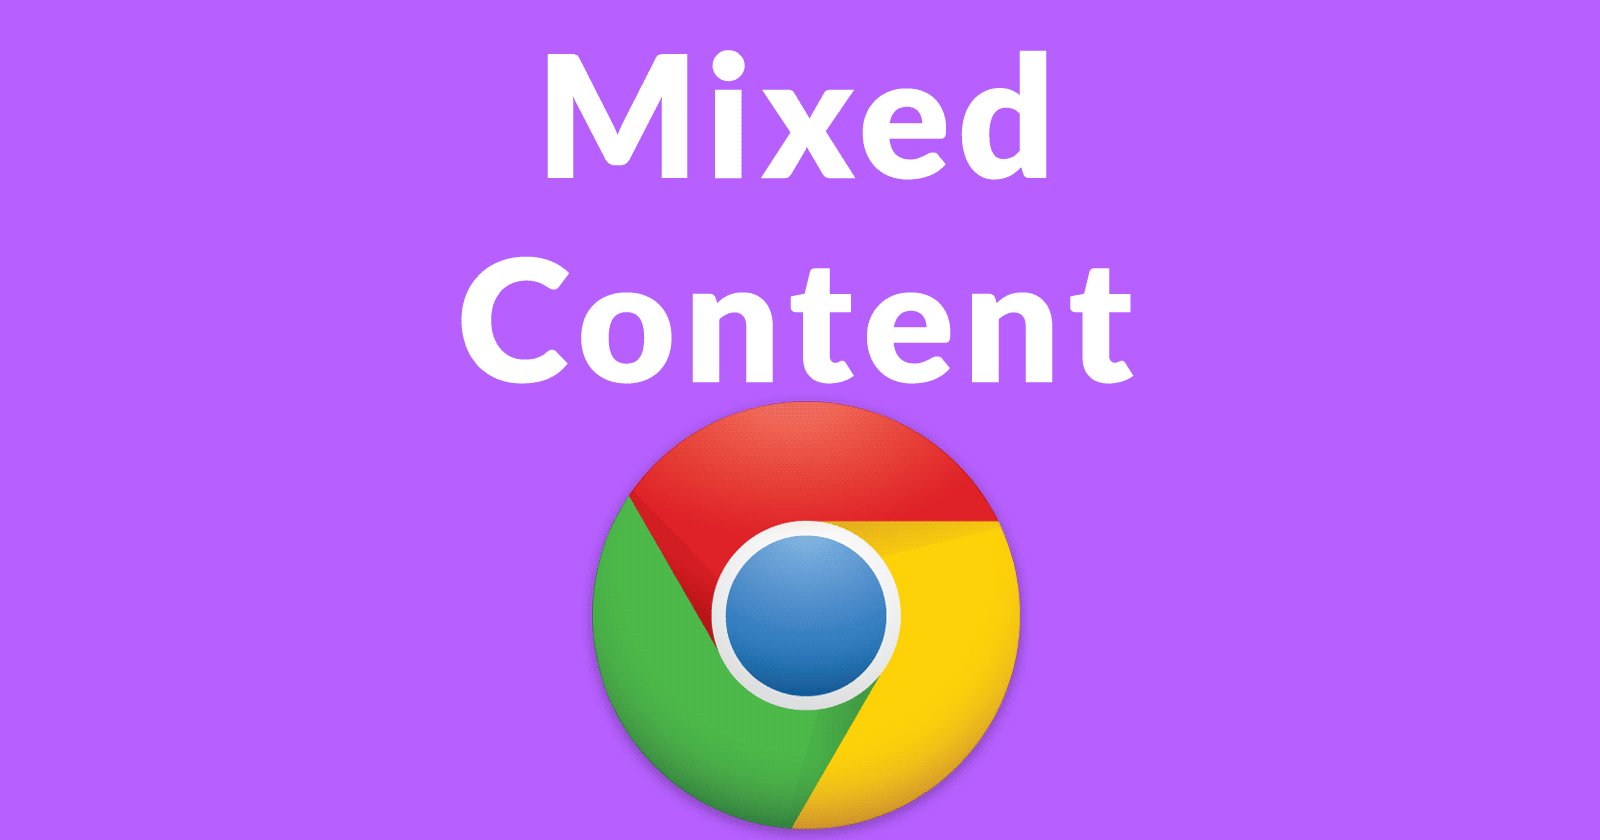 Chrome 81 mixed content